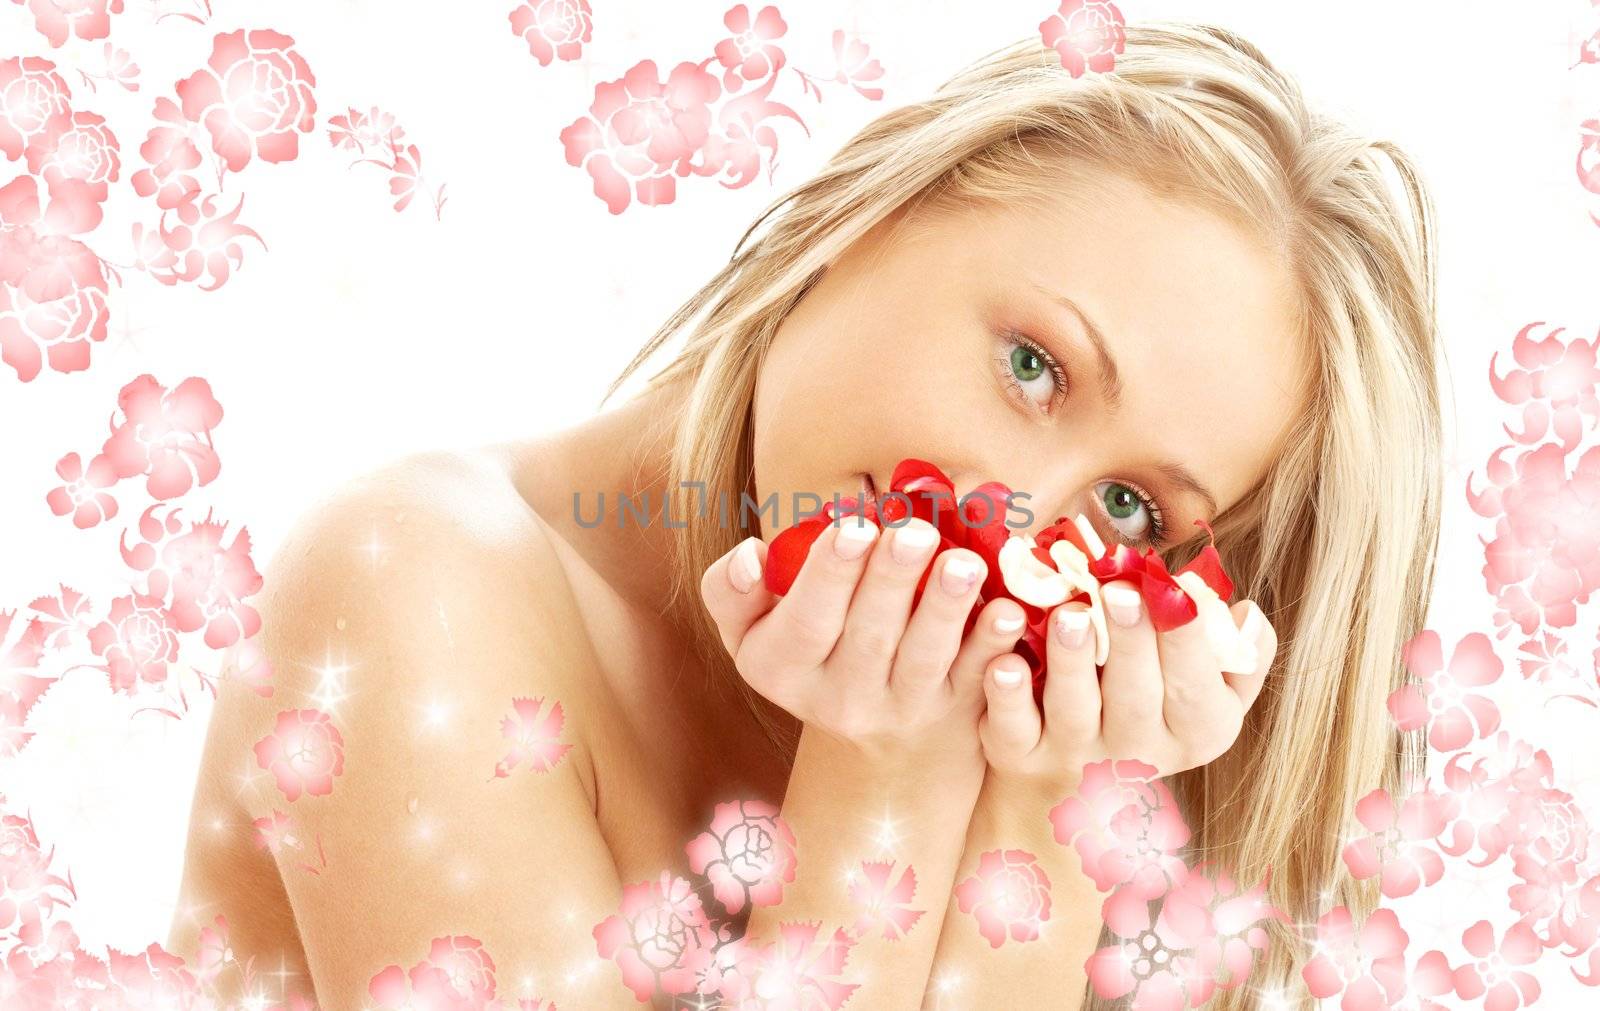 lovely blond in spa with red and white petals and flowers #2 by dolgachov